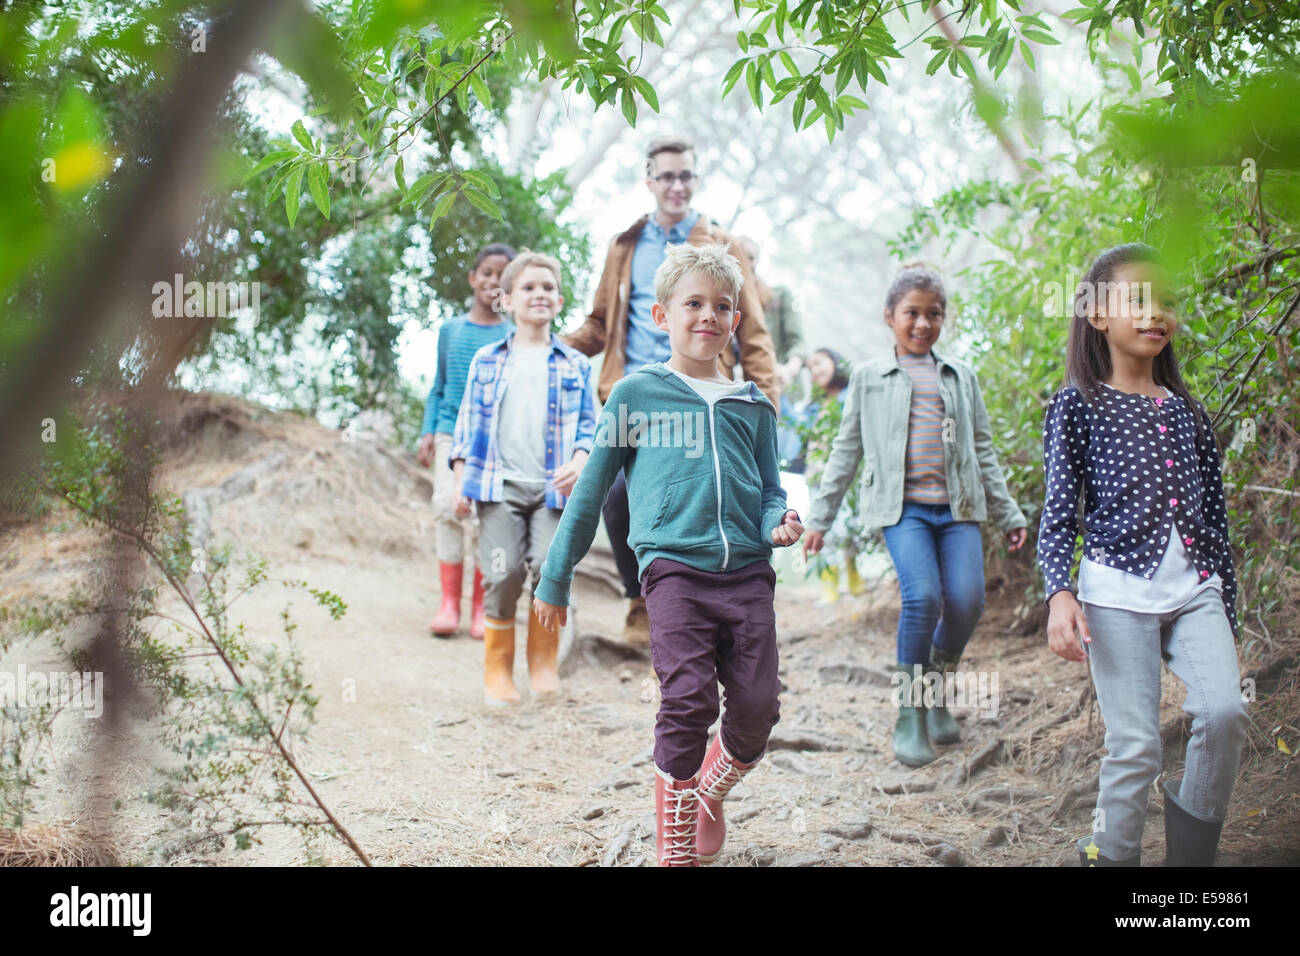 Students and teacher walking in forest Stock Photo